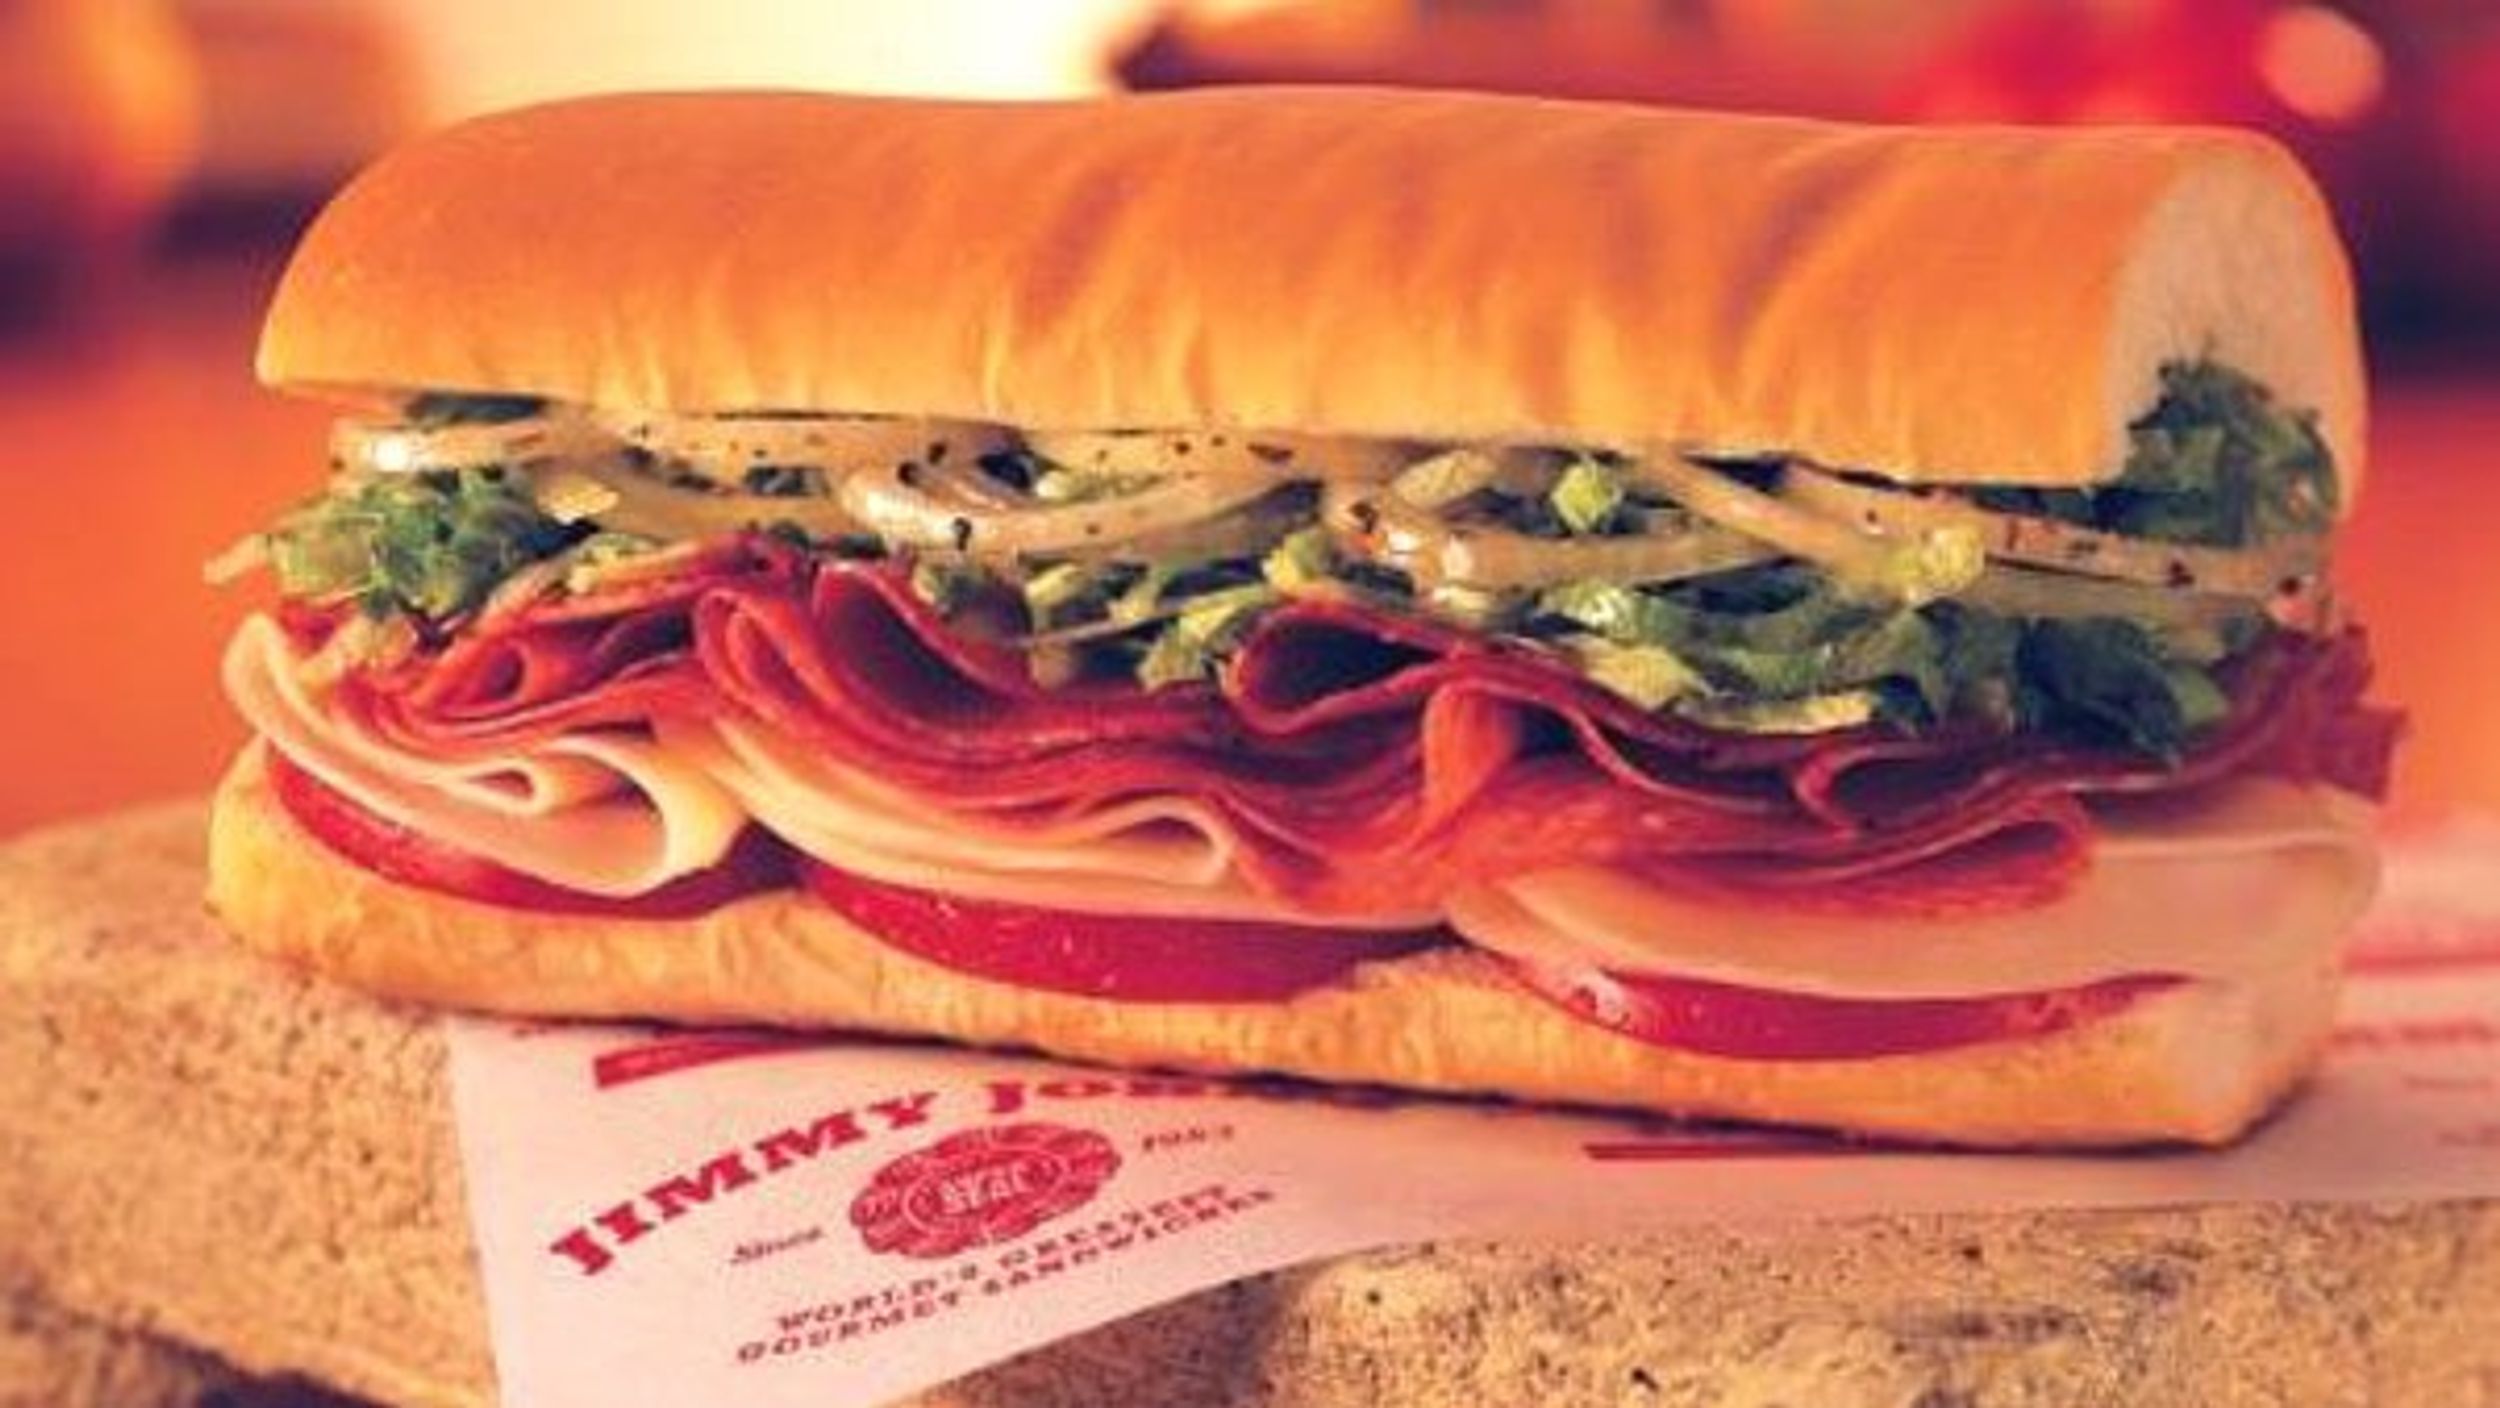 Power Ranking The 7 Sub Sandwiches At Jimmy John's